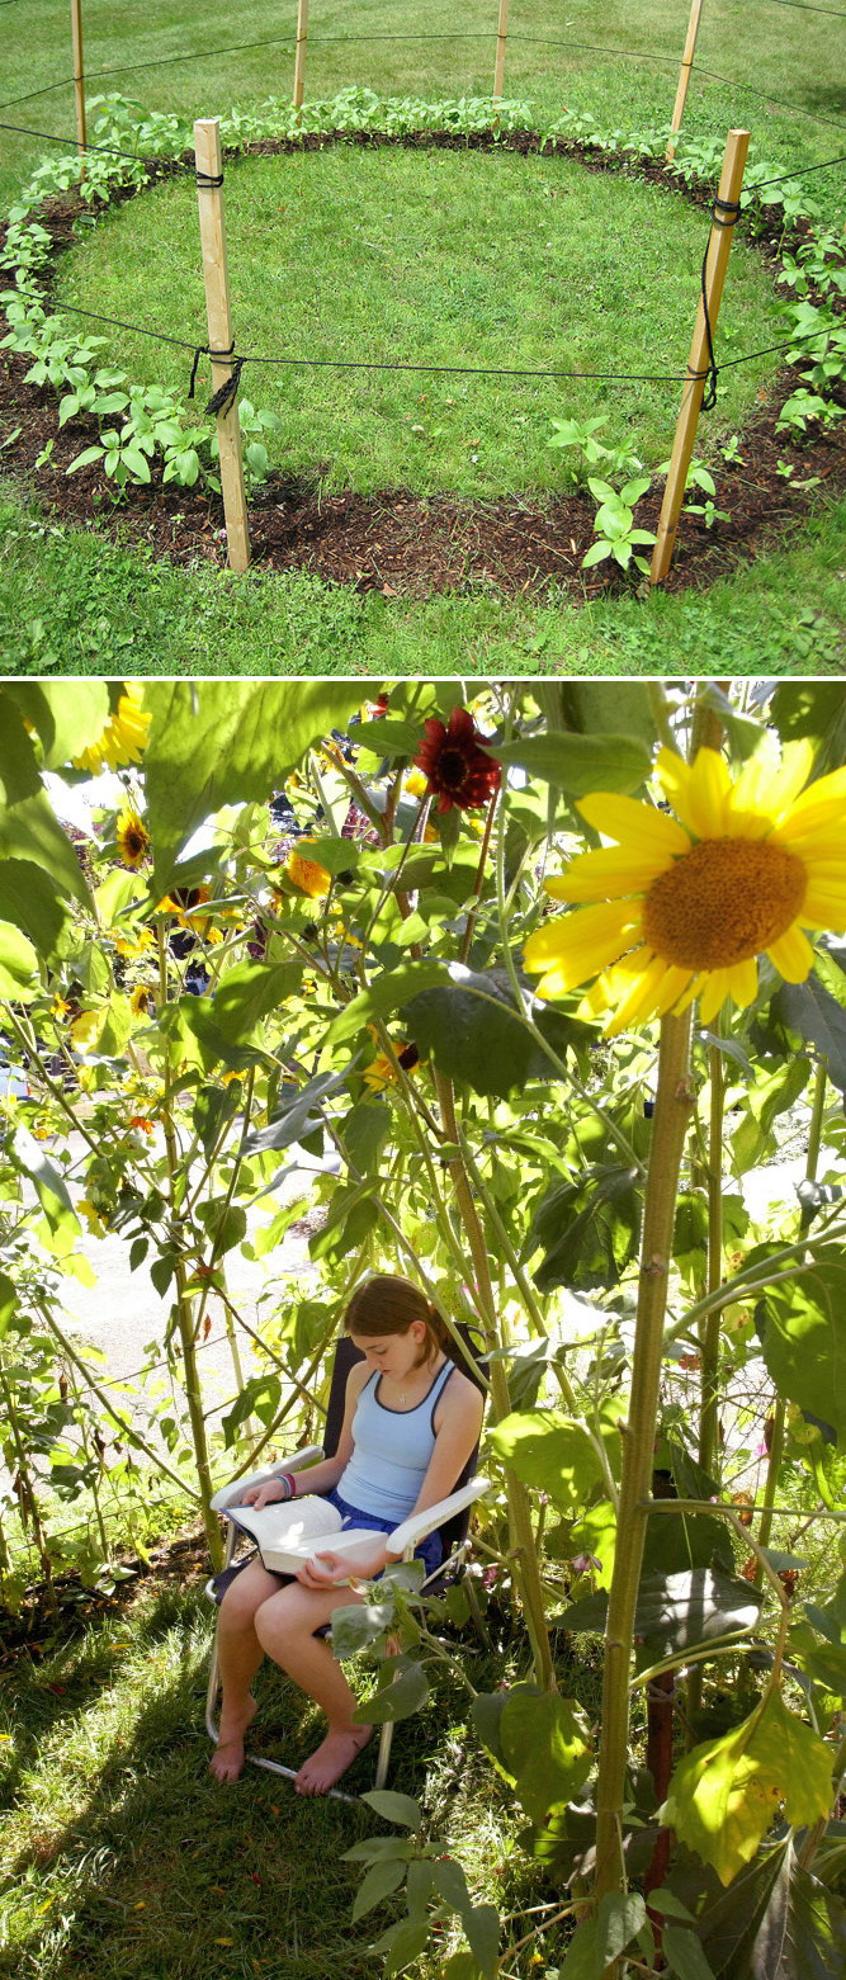 Grow a sunflower house for the kids to play in.